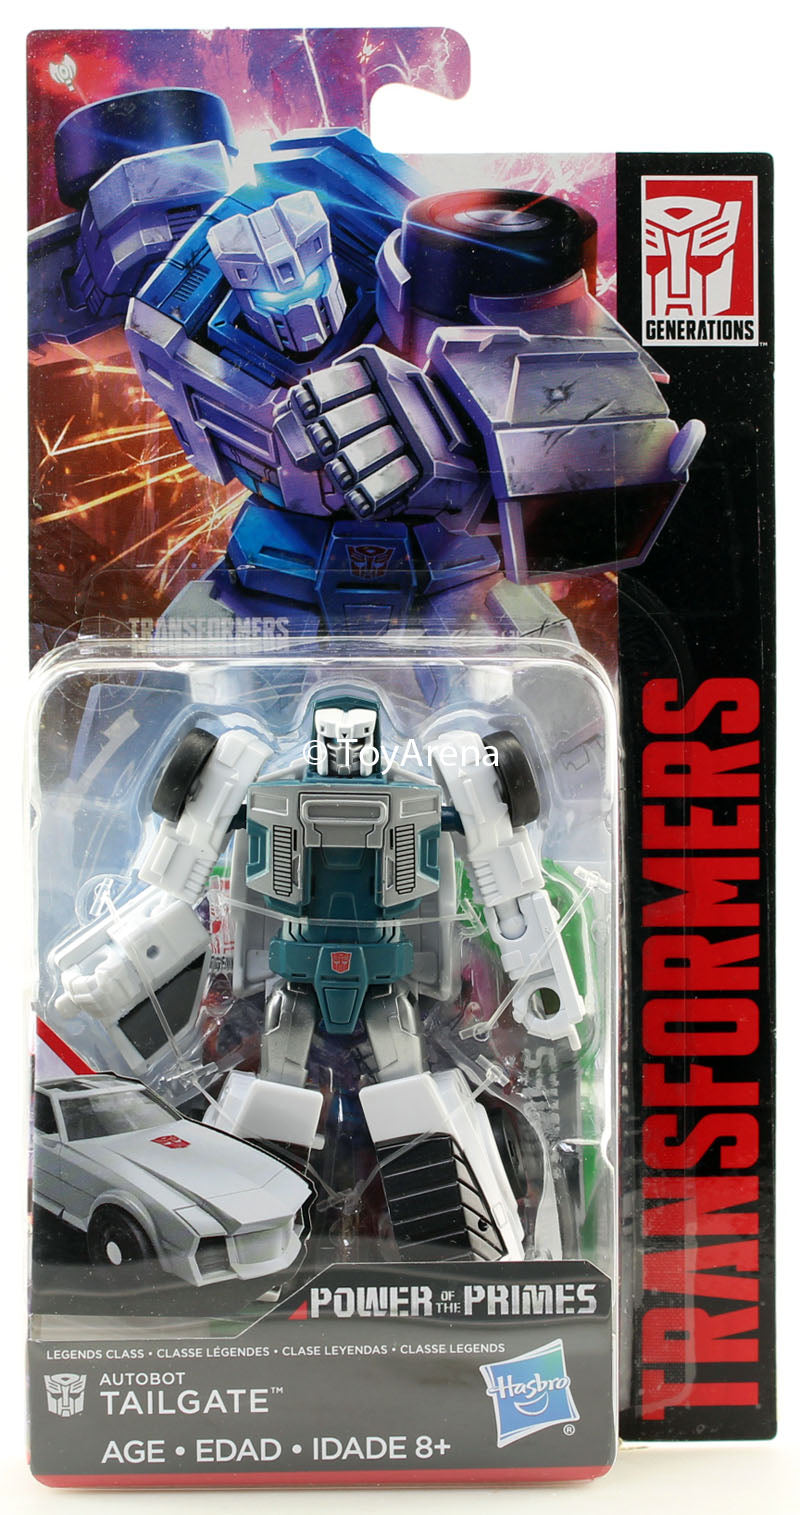 Transformers Generations Power of the Primes Legends Class Tailgate Figure